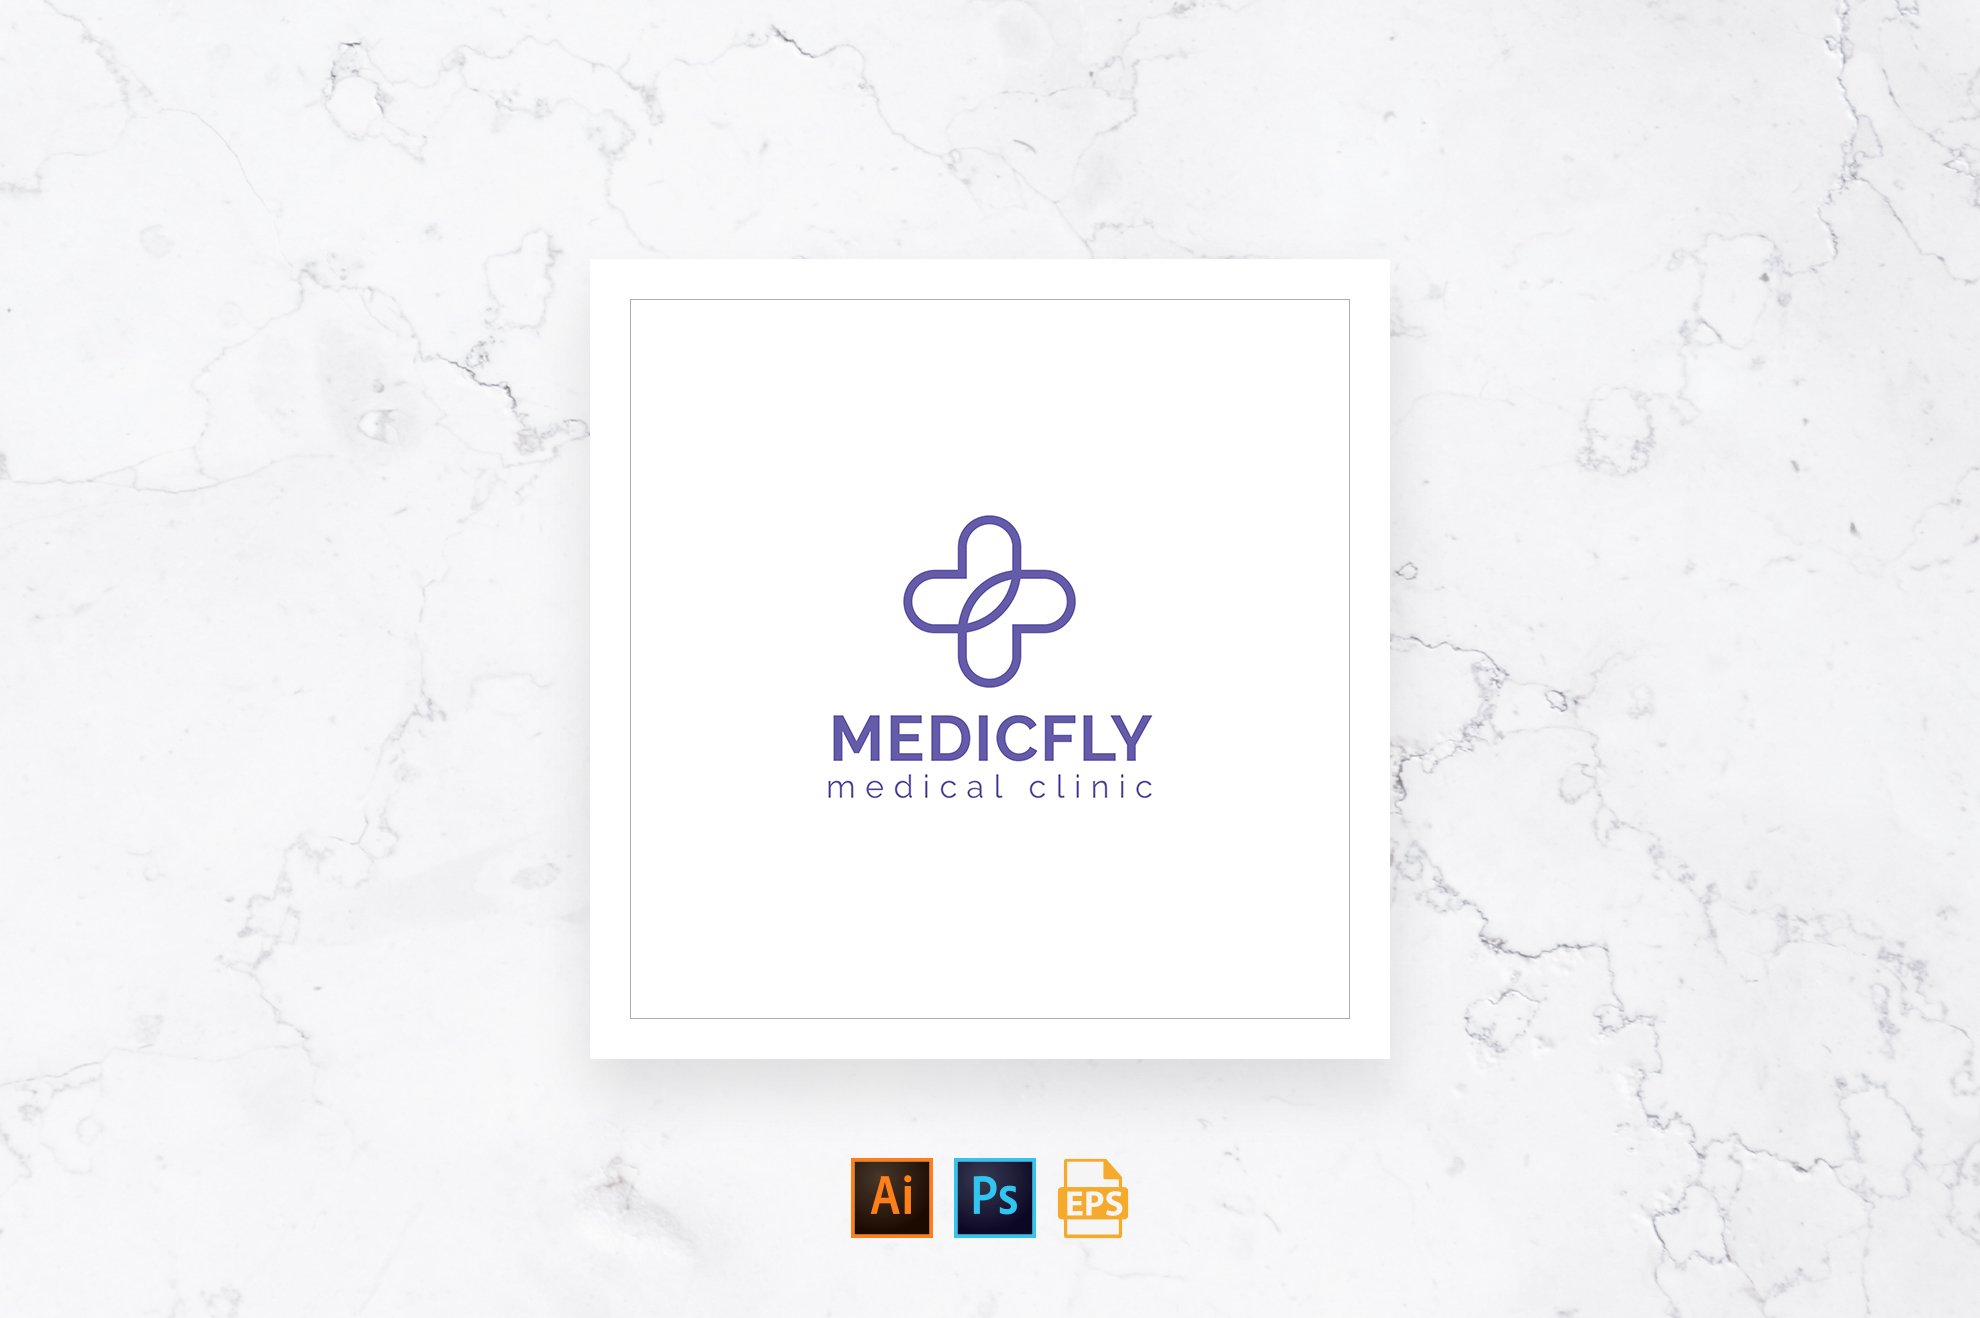 Medical Clinic Logo cover image.